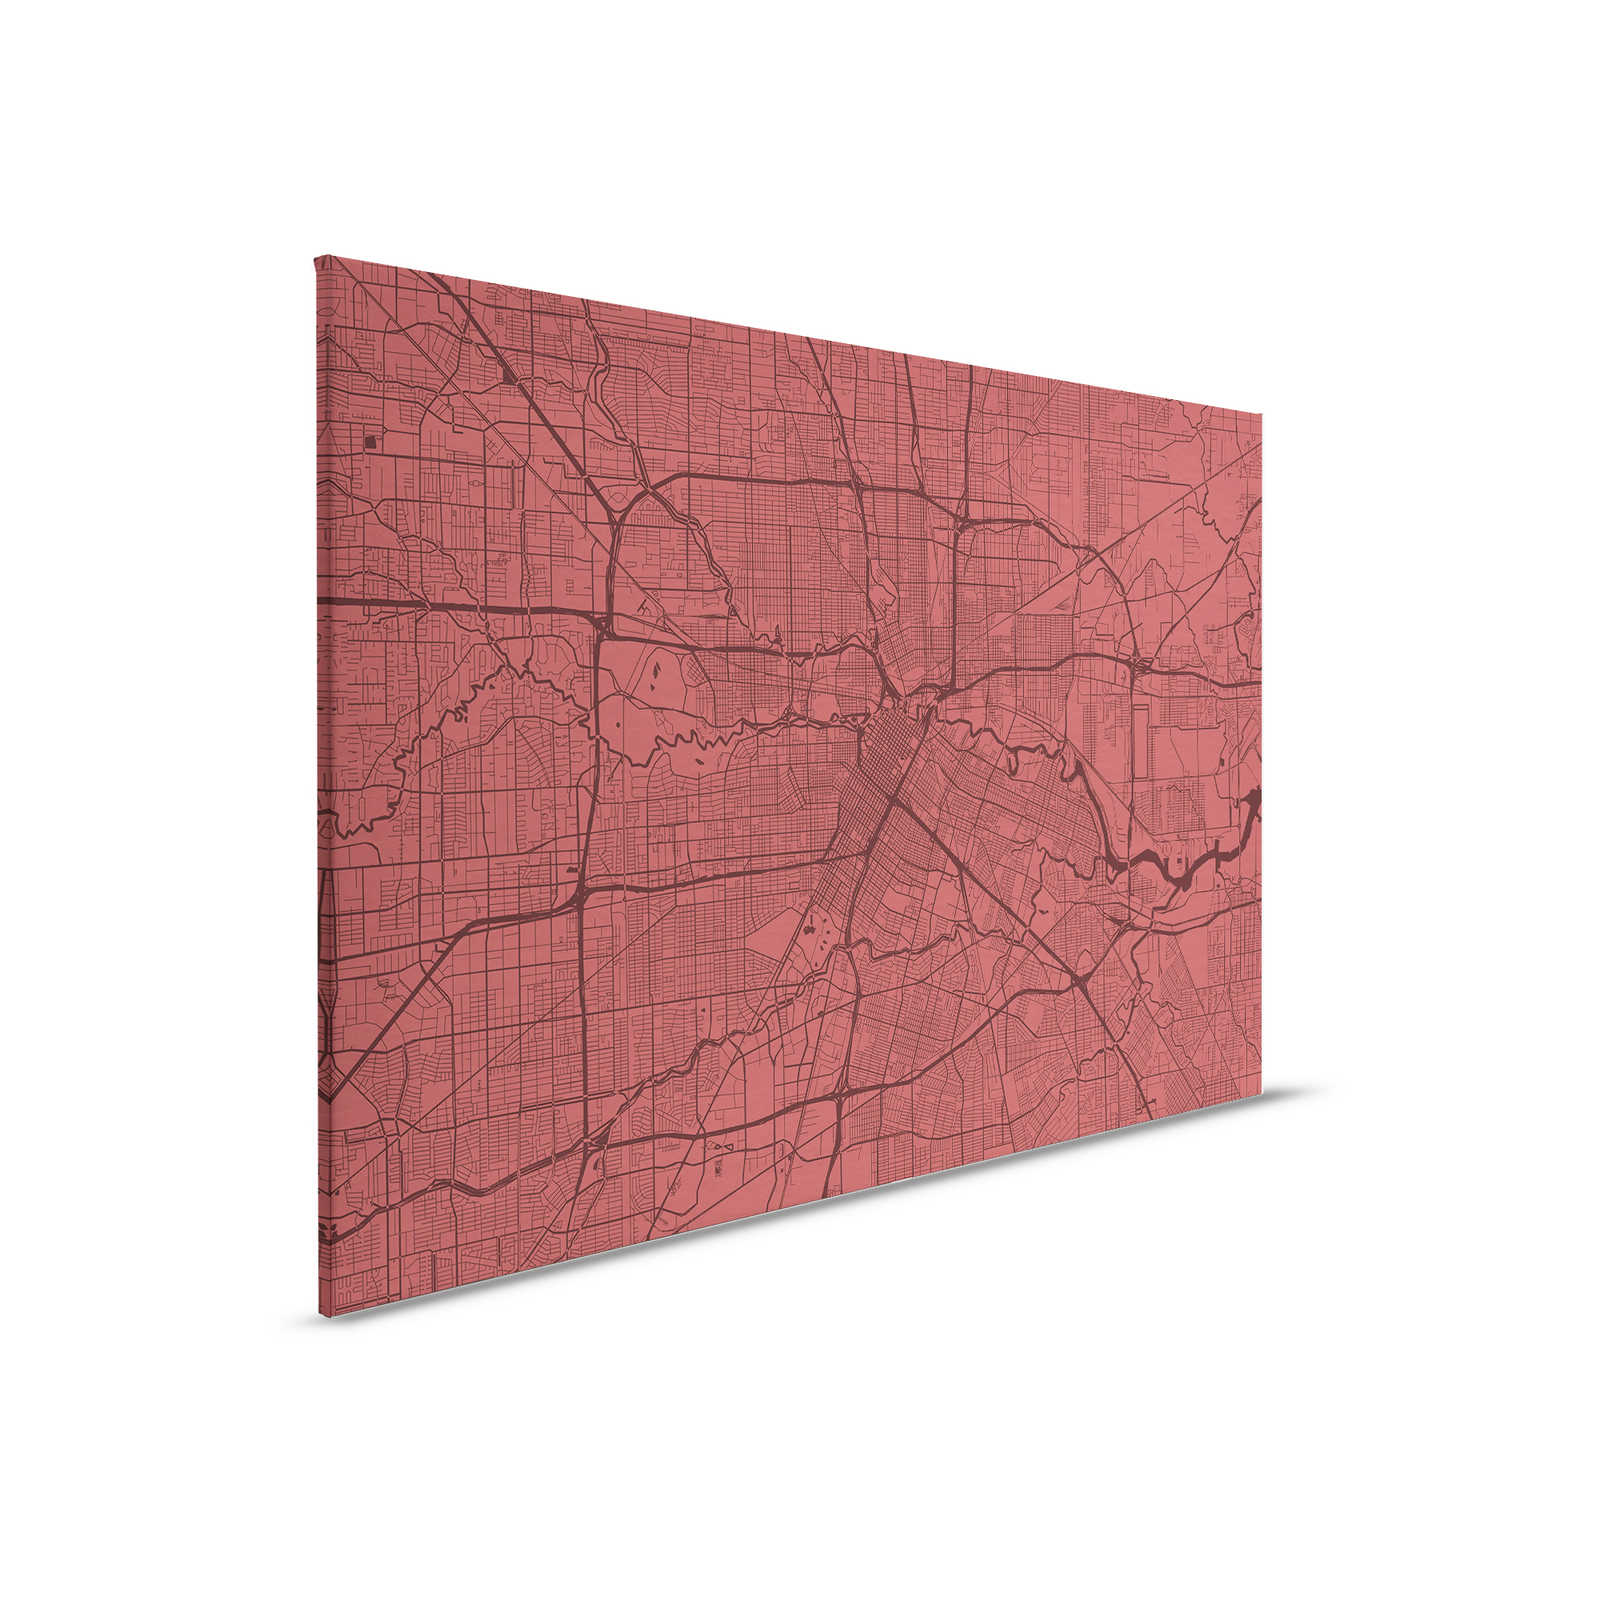         Canvas painting City Map with Street Course | red - 0,90 m x 0,60 m
    